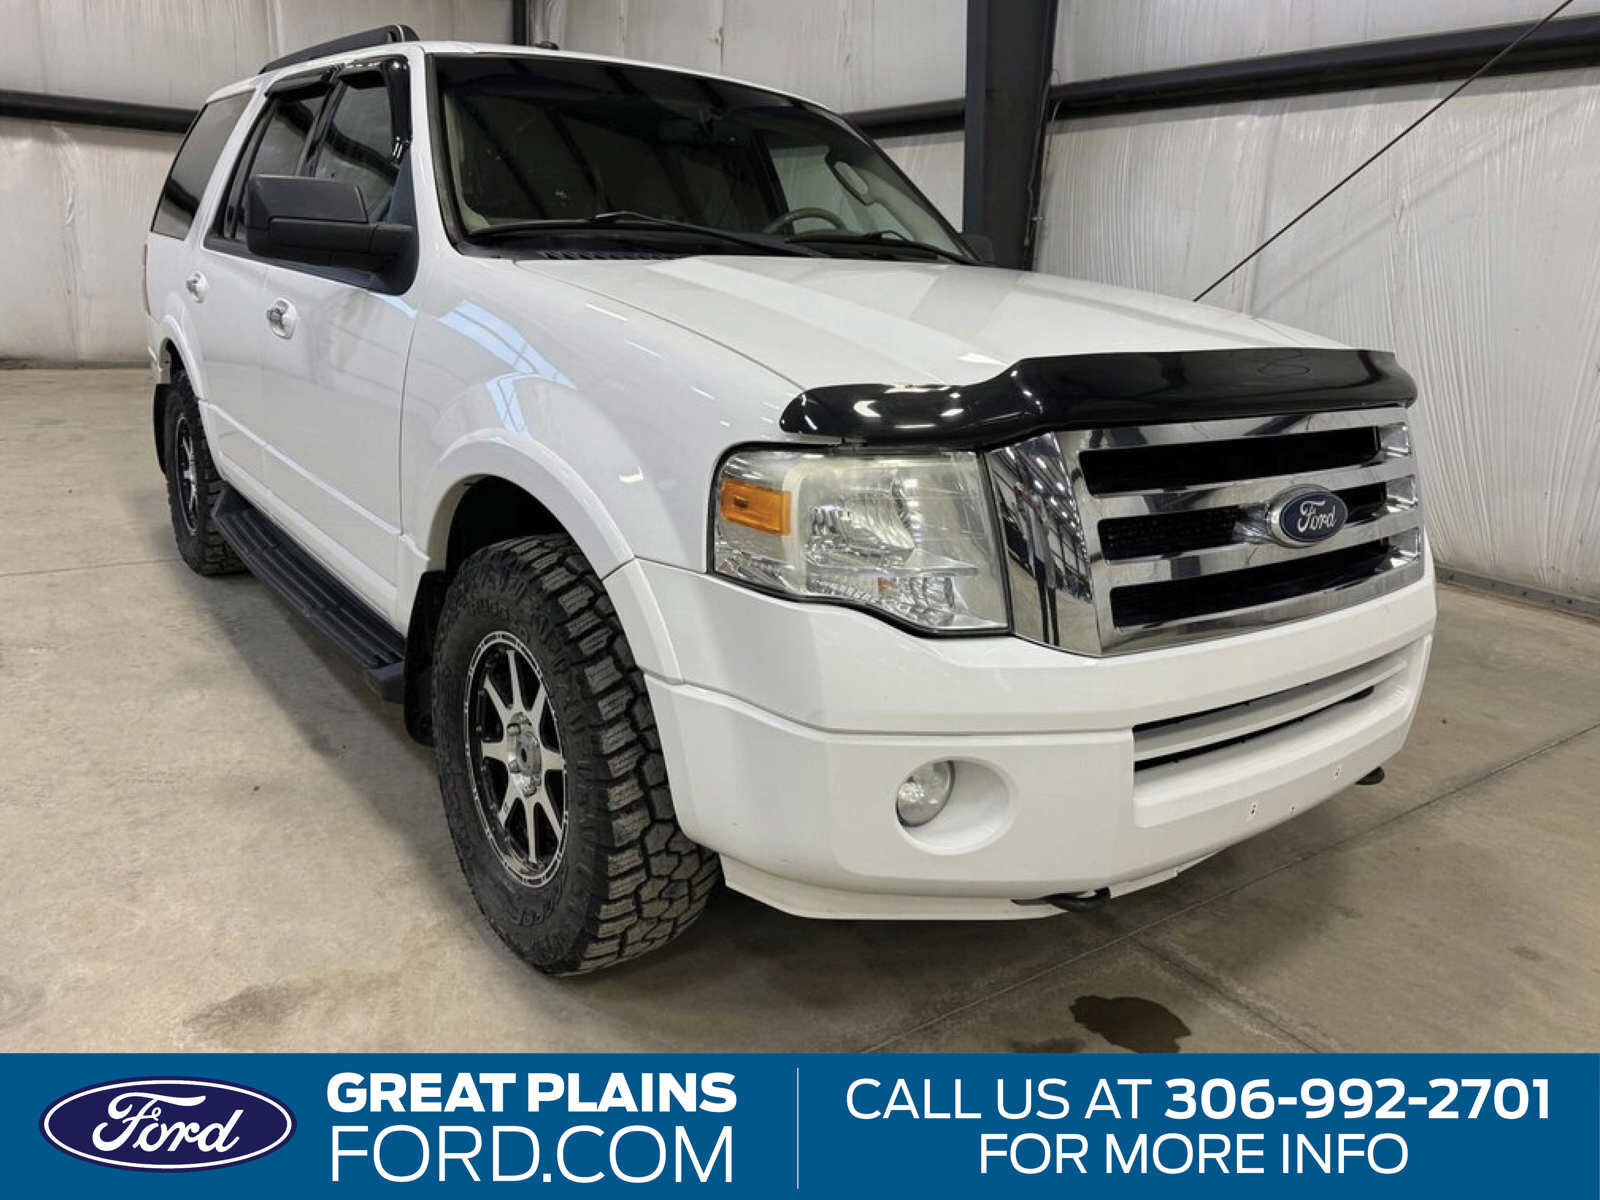 2011 Ford Expedition XLT | 4x4 | Keyless Entry | Third Row Seating